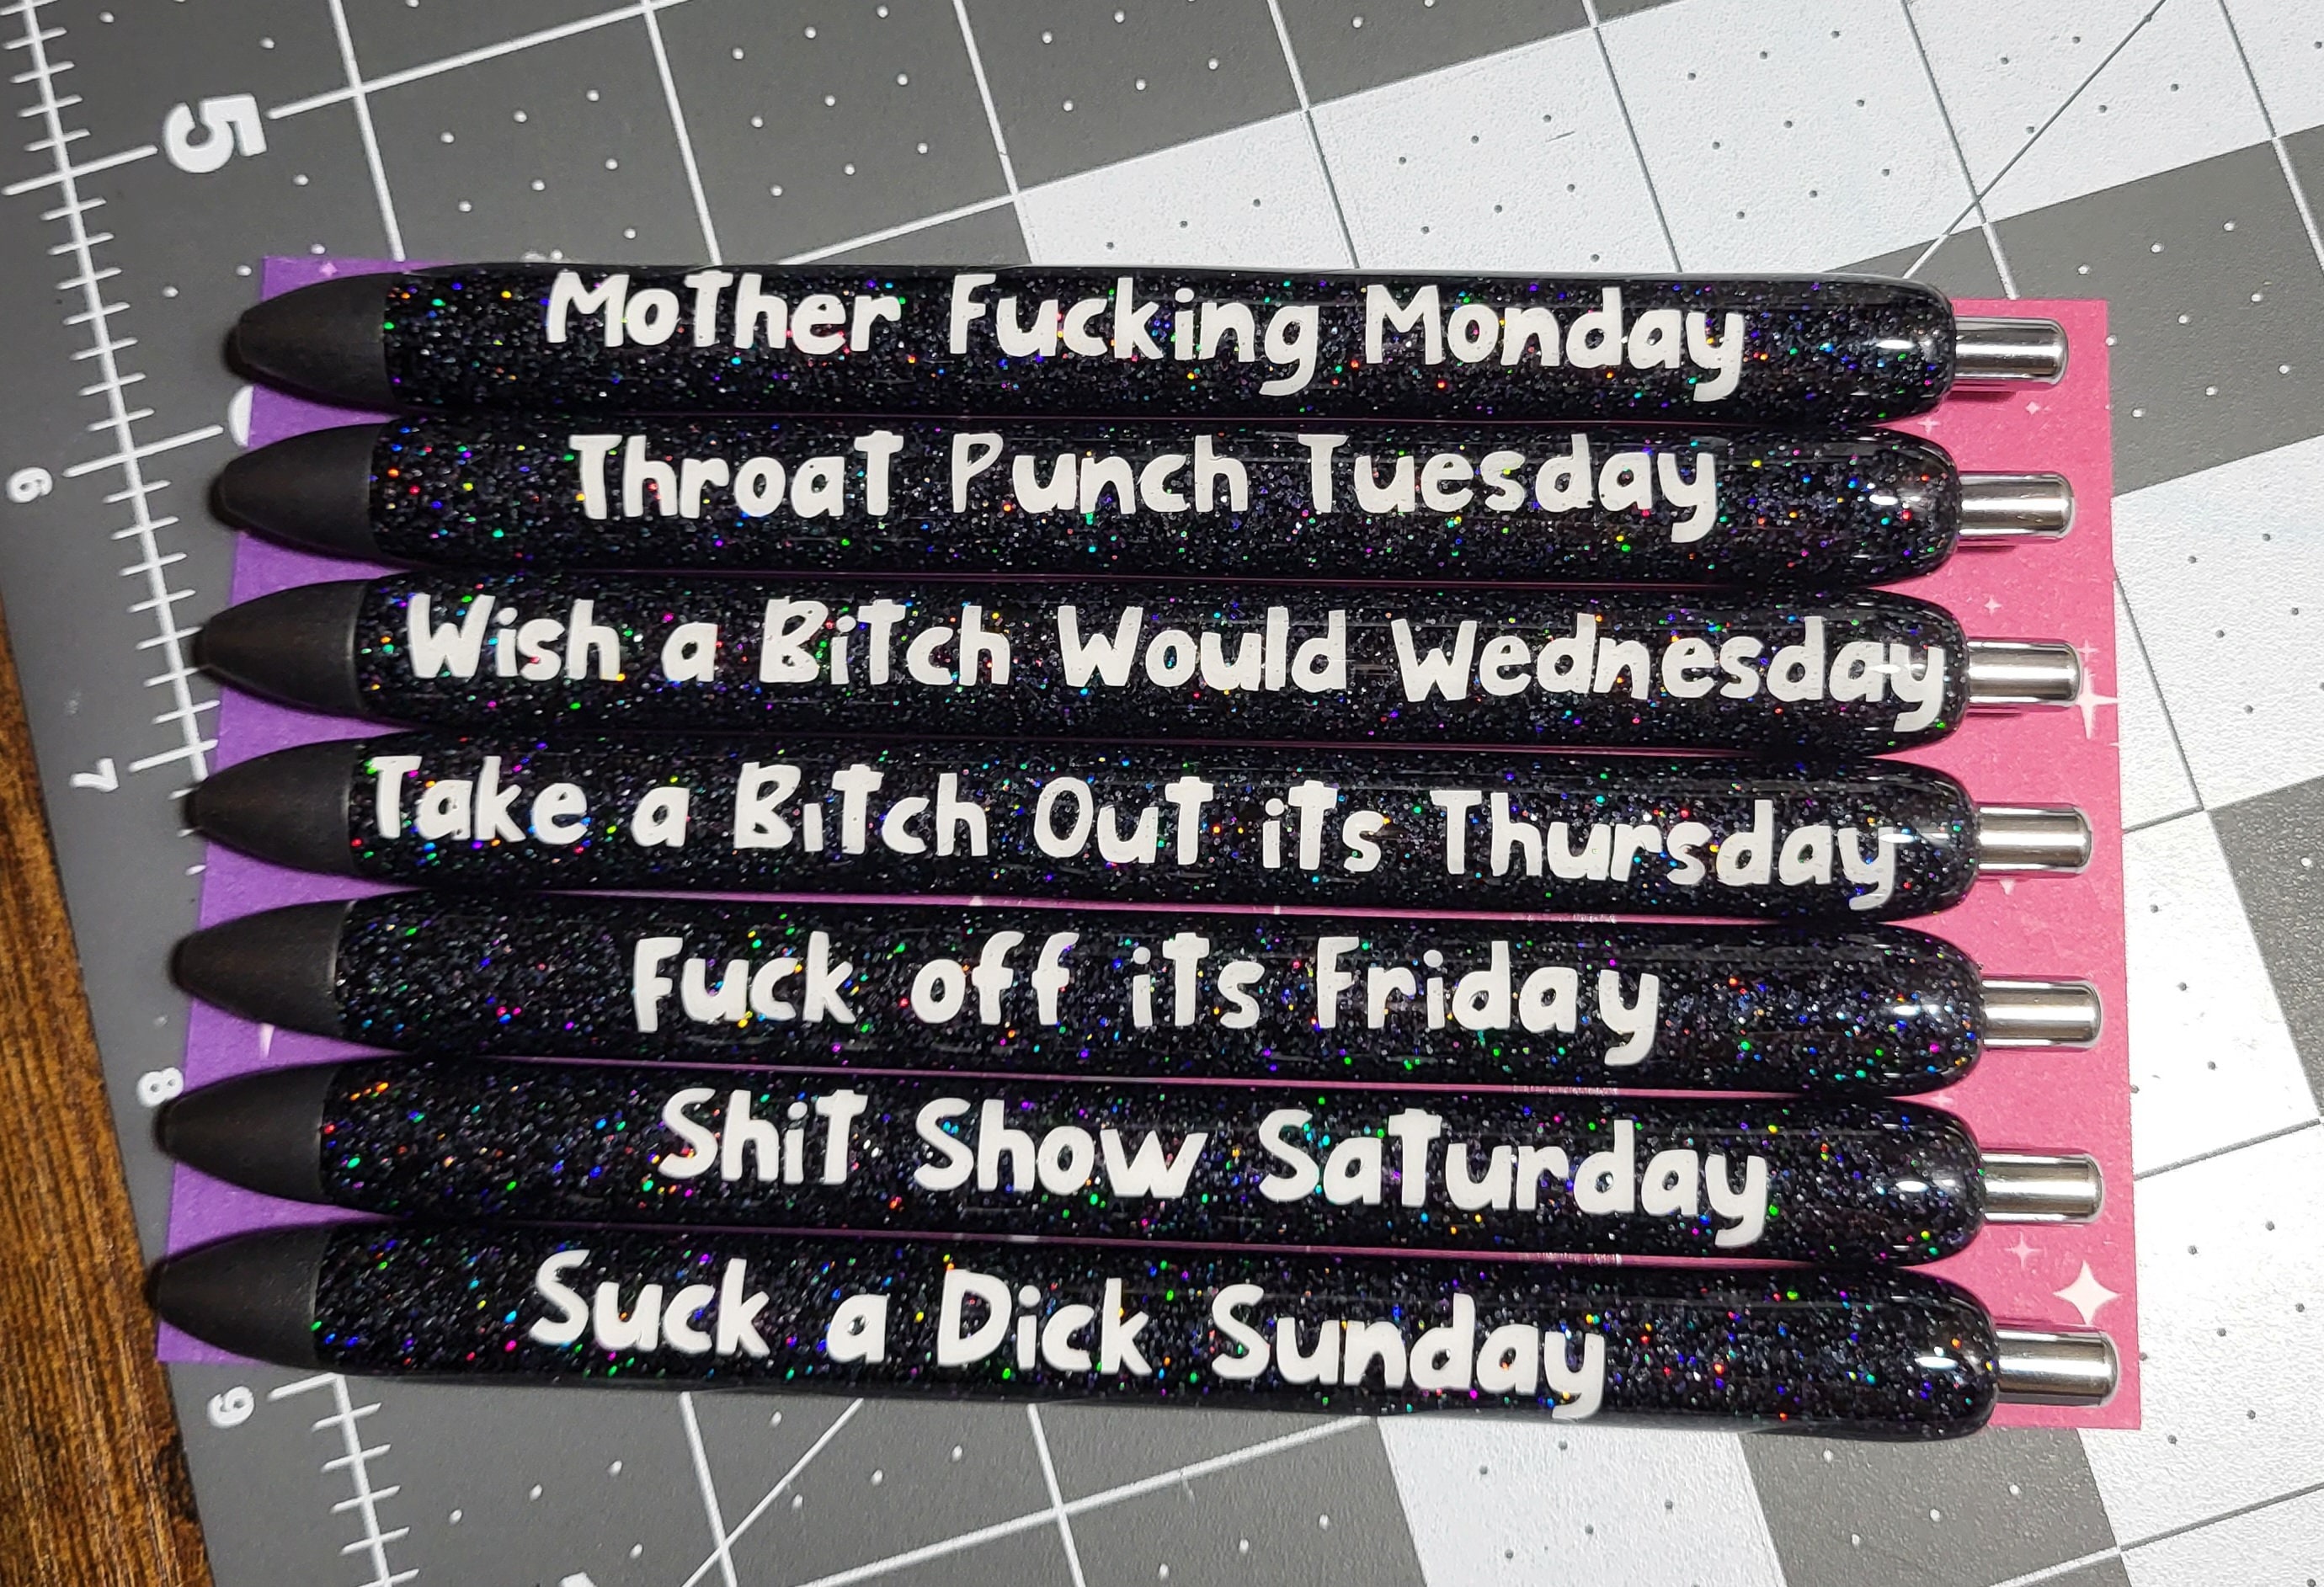 Sabary 7 Pcs Swear Word Daily Pens Funny Seven Days of the Week pens Cuss  Word Negative Snarky Office Dirty Ballpoint Pens for Colleague Co-worker